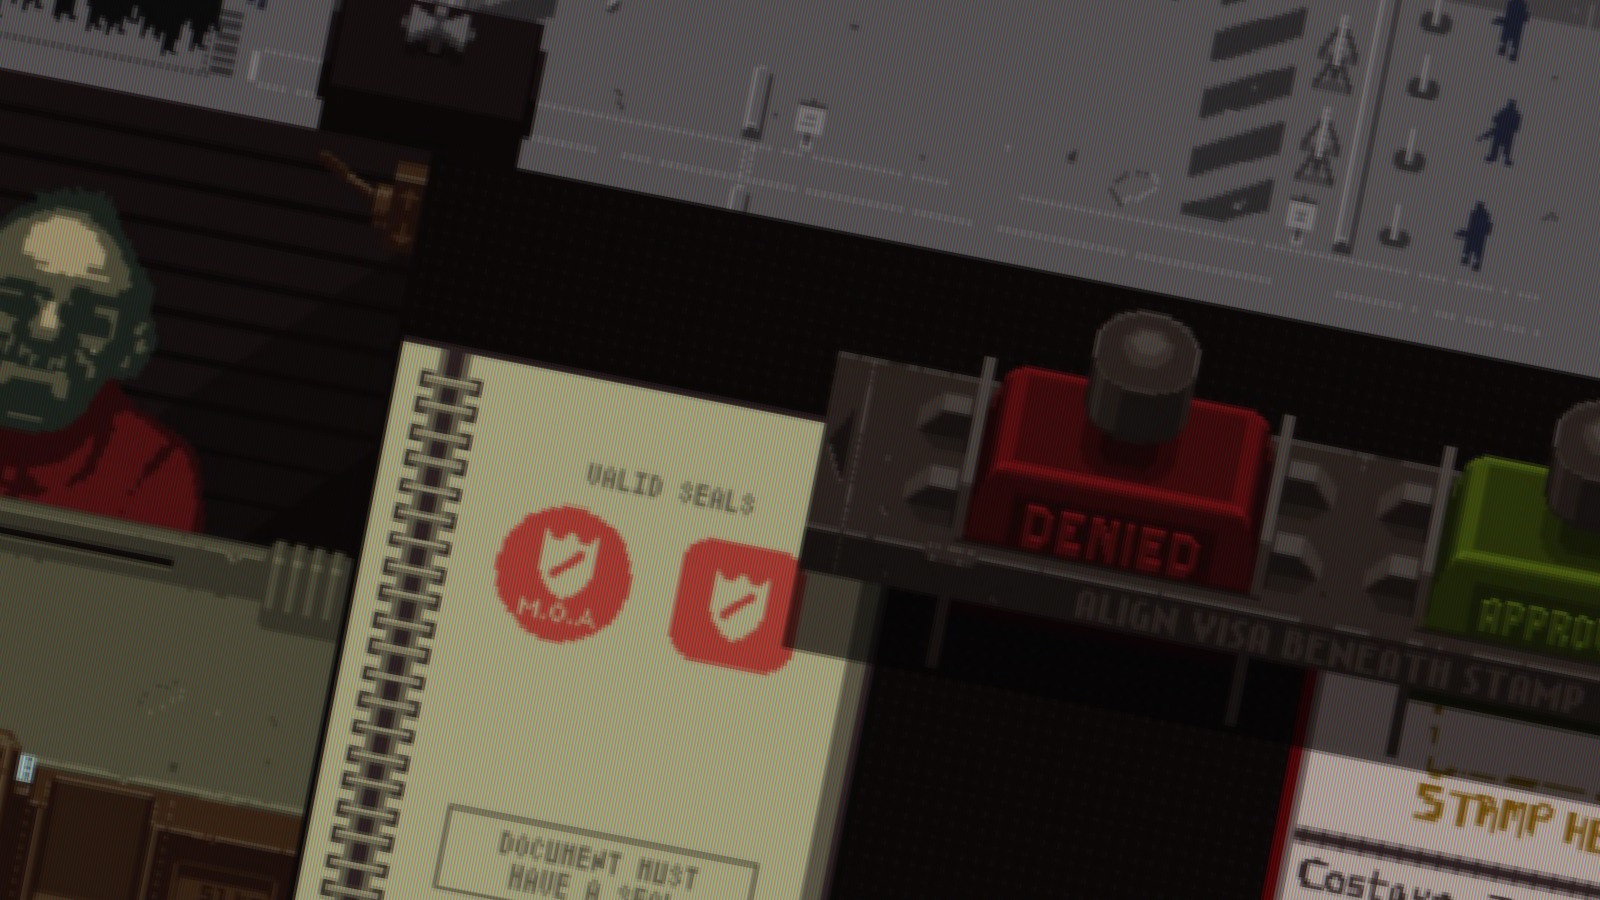 Papers Please  Game Analytics with Lenses and Tools